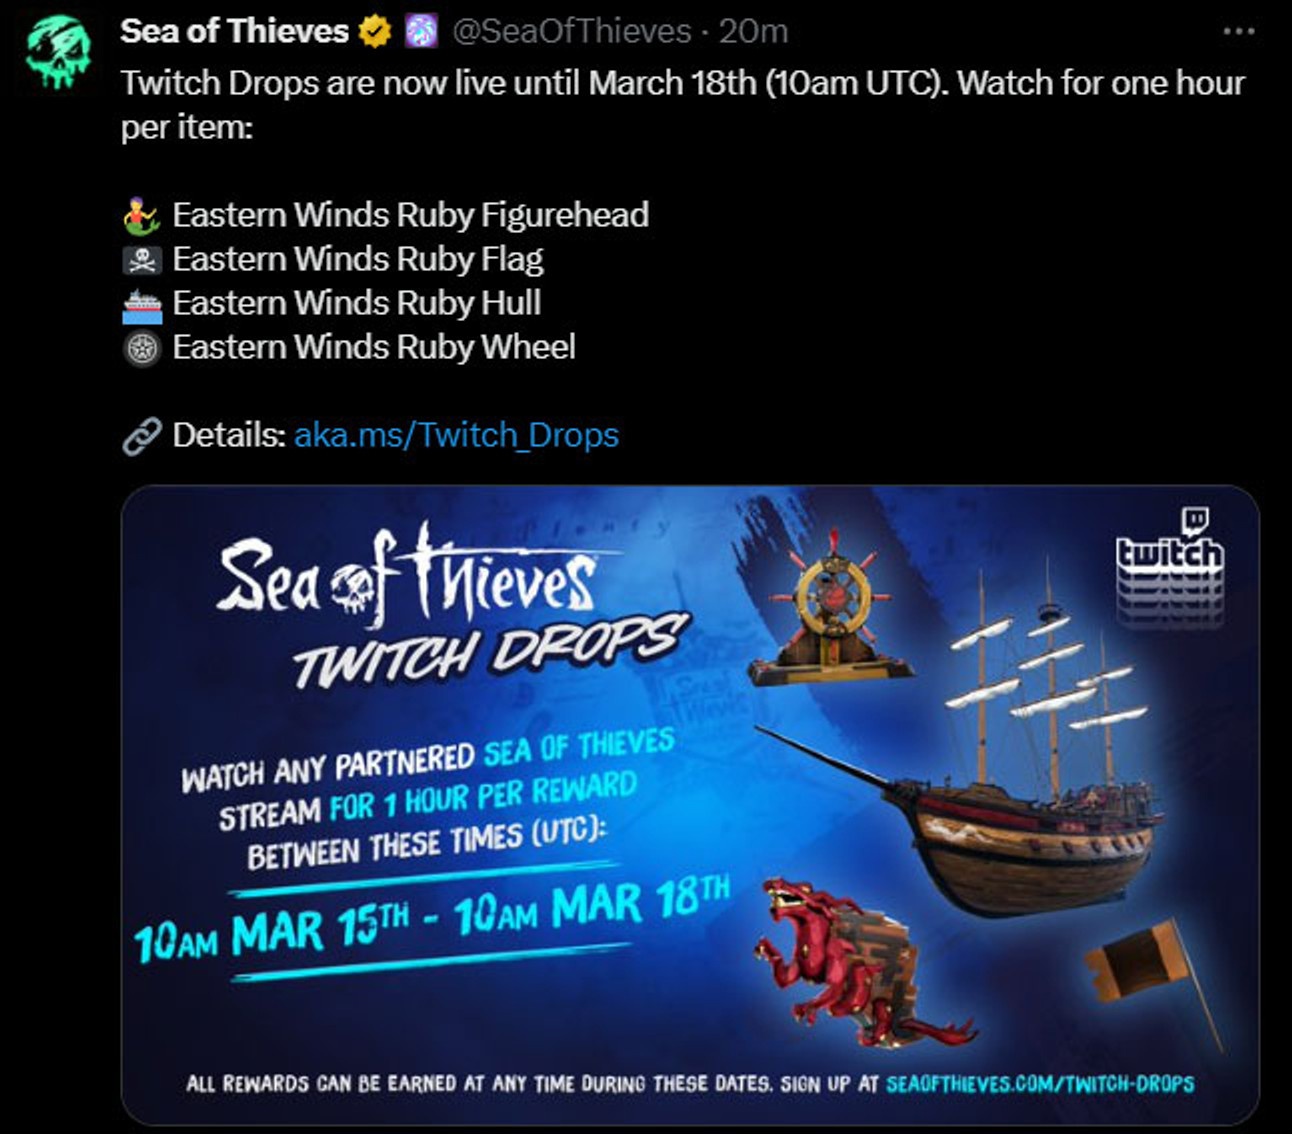 sea-of-thieves-twitch-drops